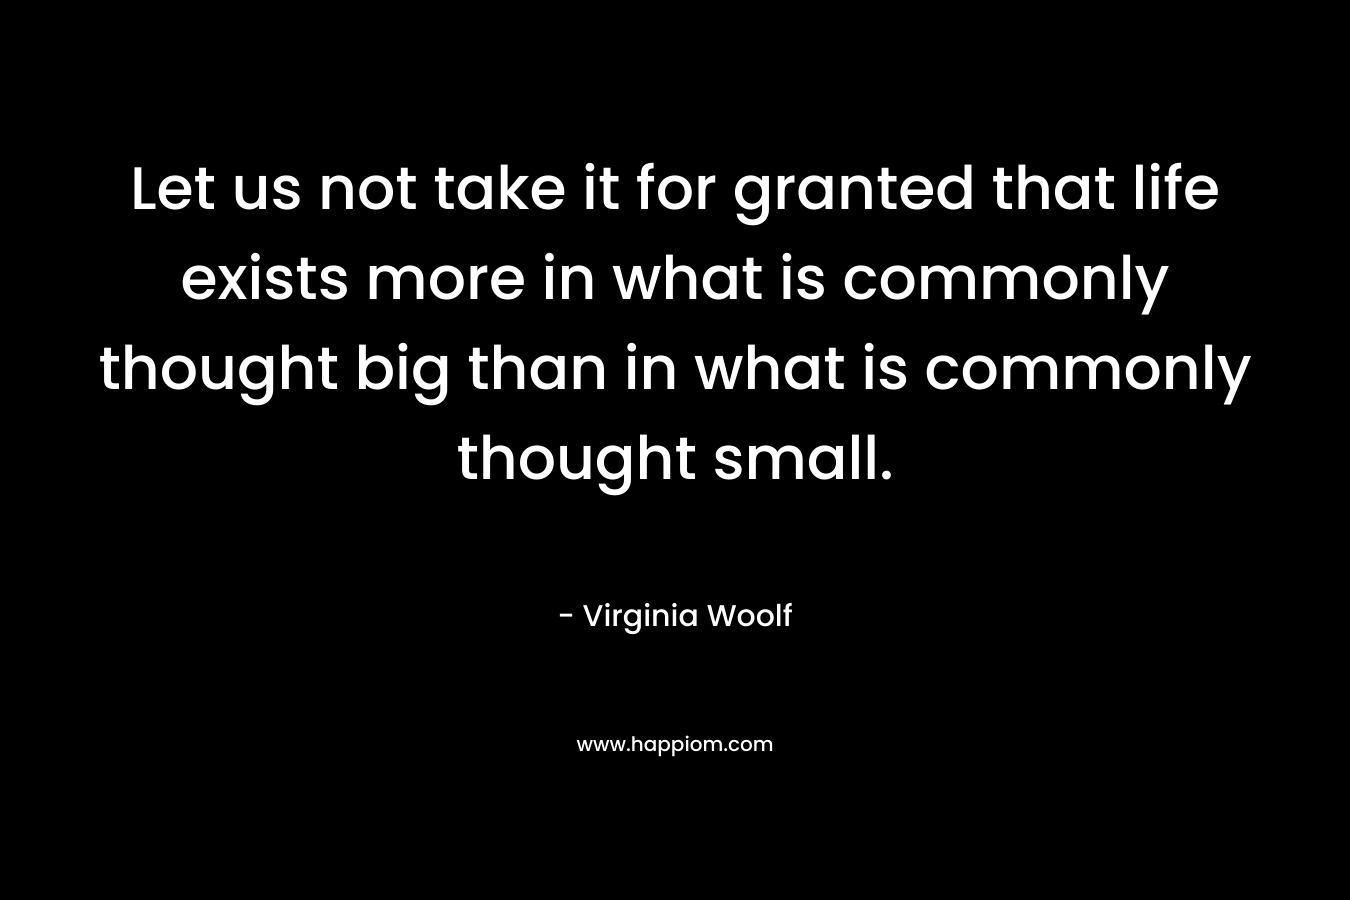 Let us not take it for granted that life exists more in what is commonly thought big than in what is commonly thought small.